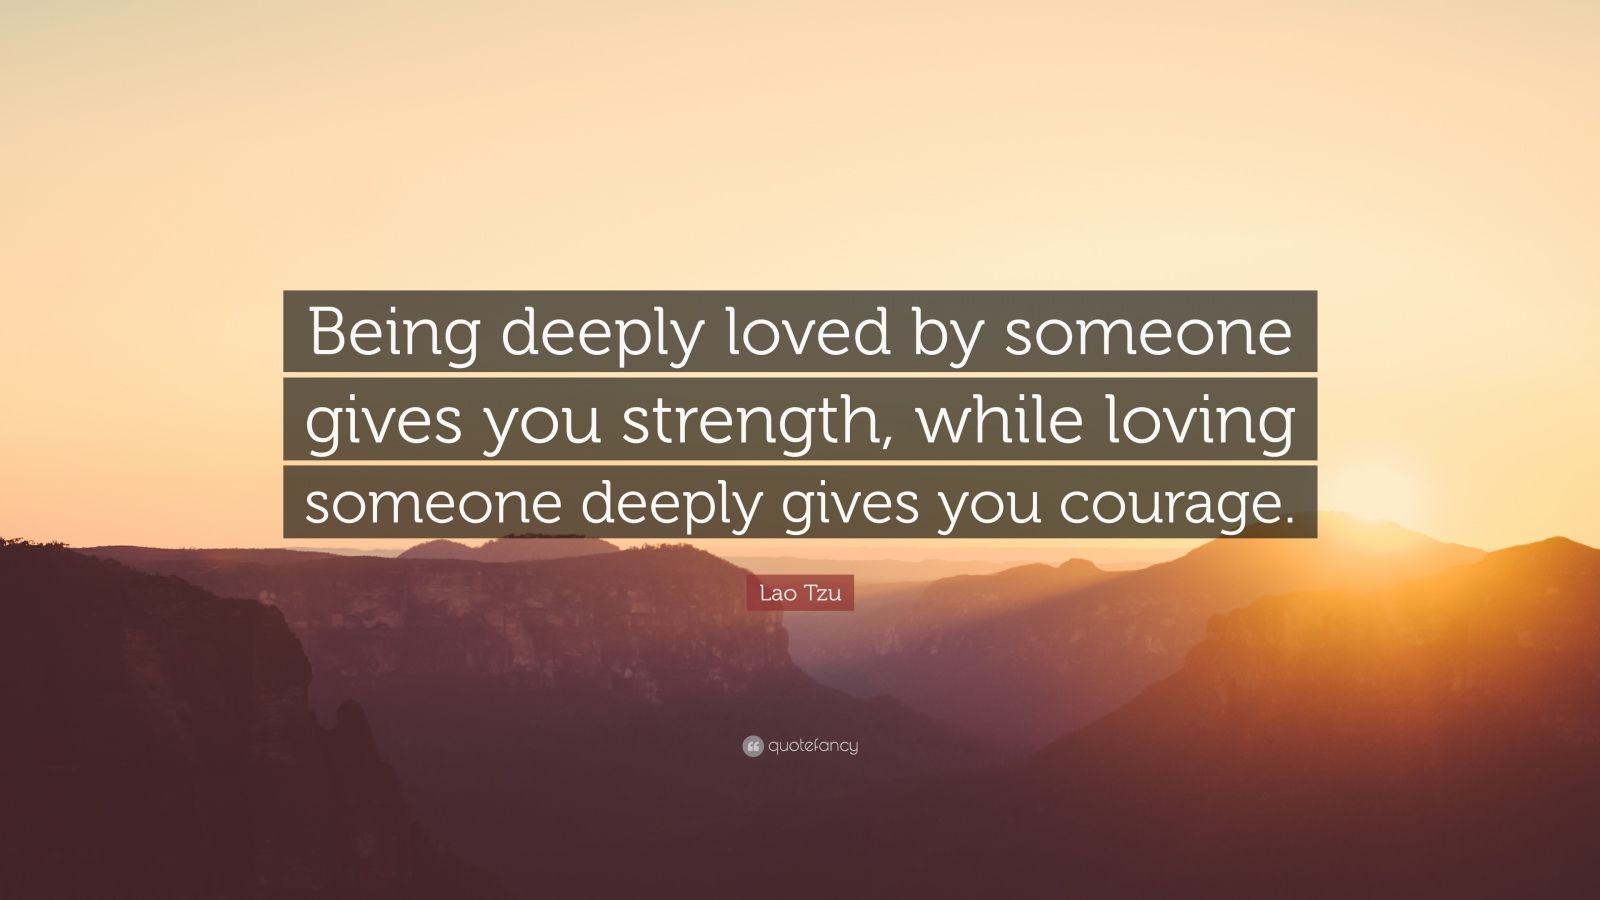 Lao Tzu Quote: “Being deeply loved by someone gives you ...